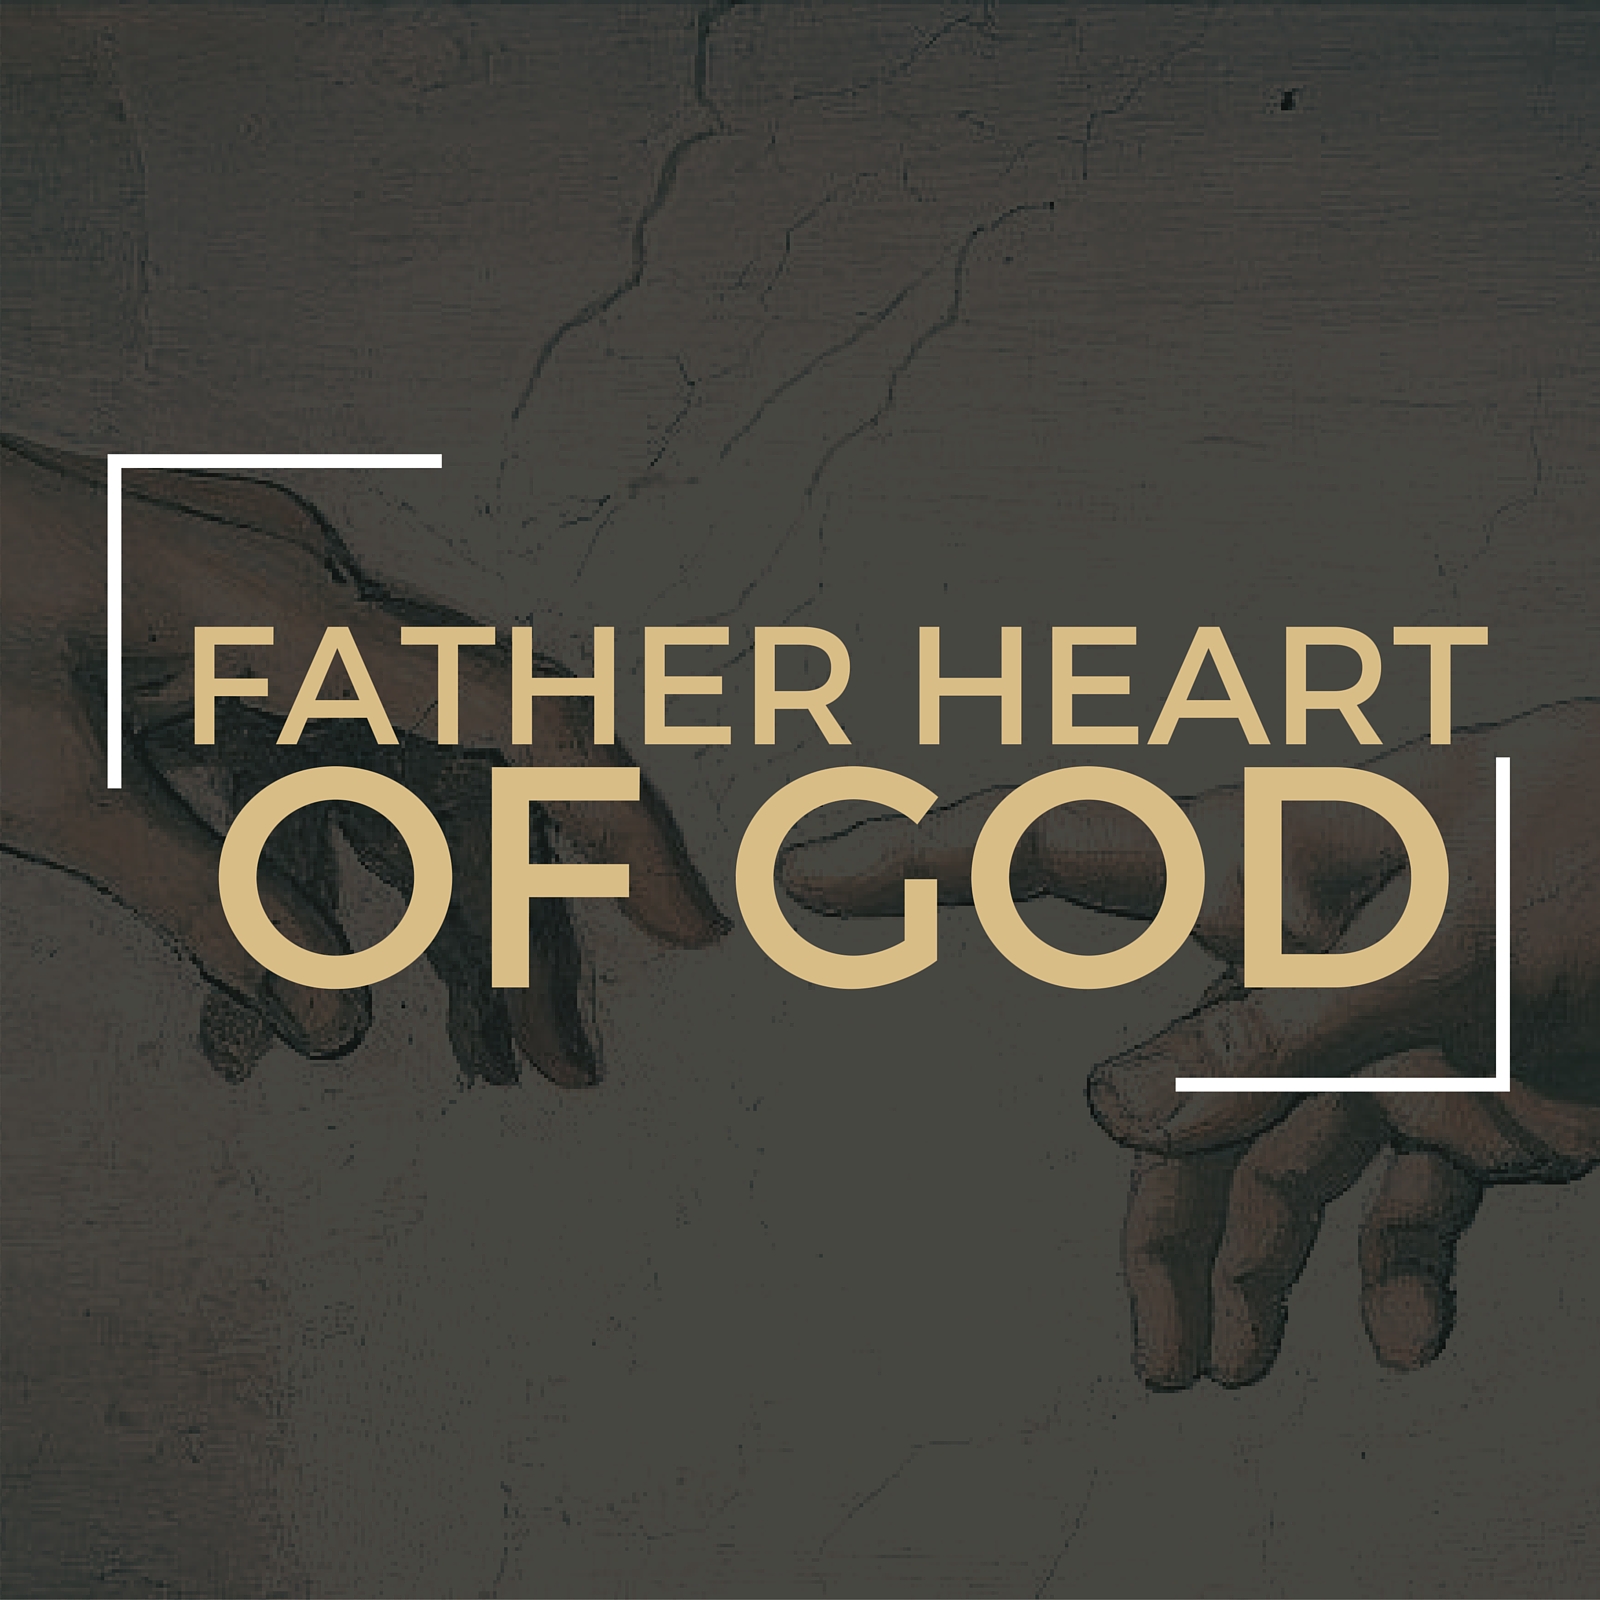 The Father Heart of God